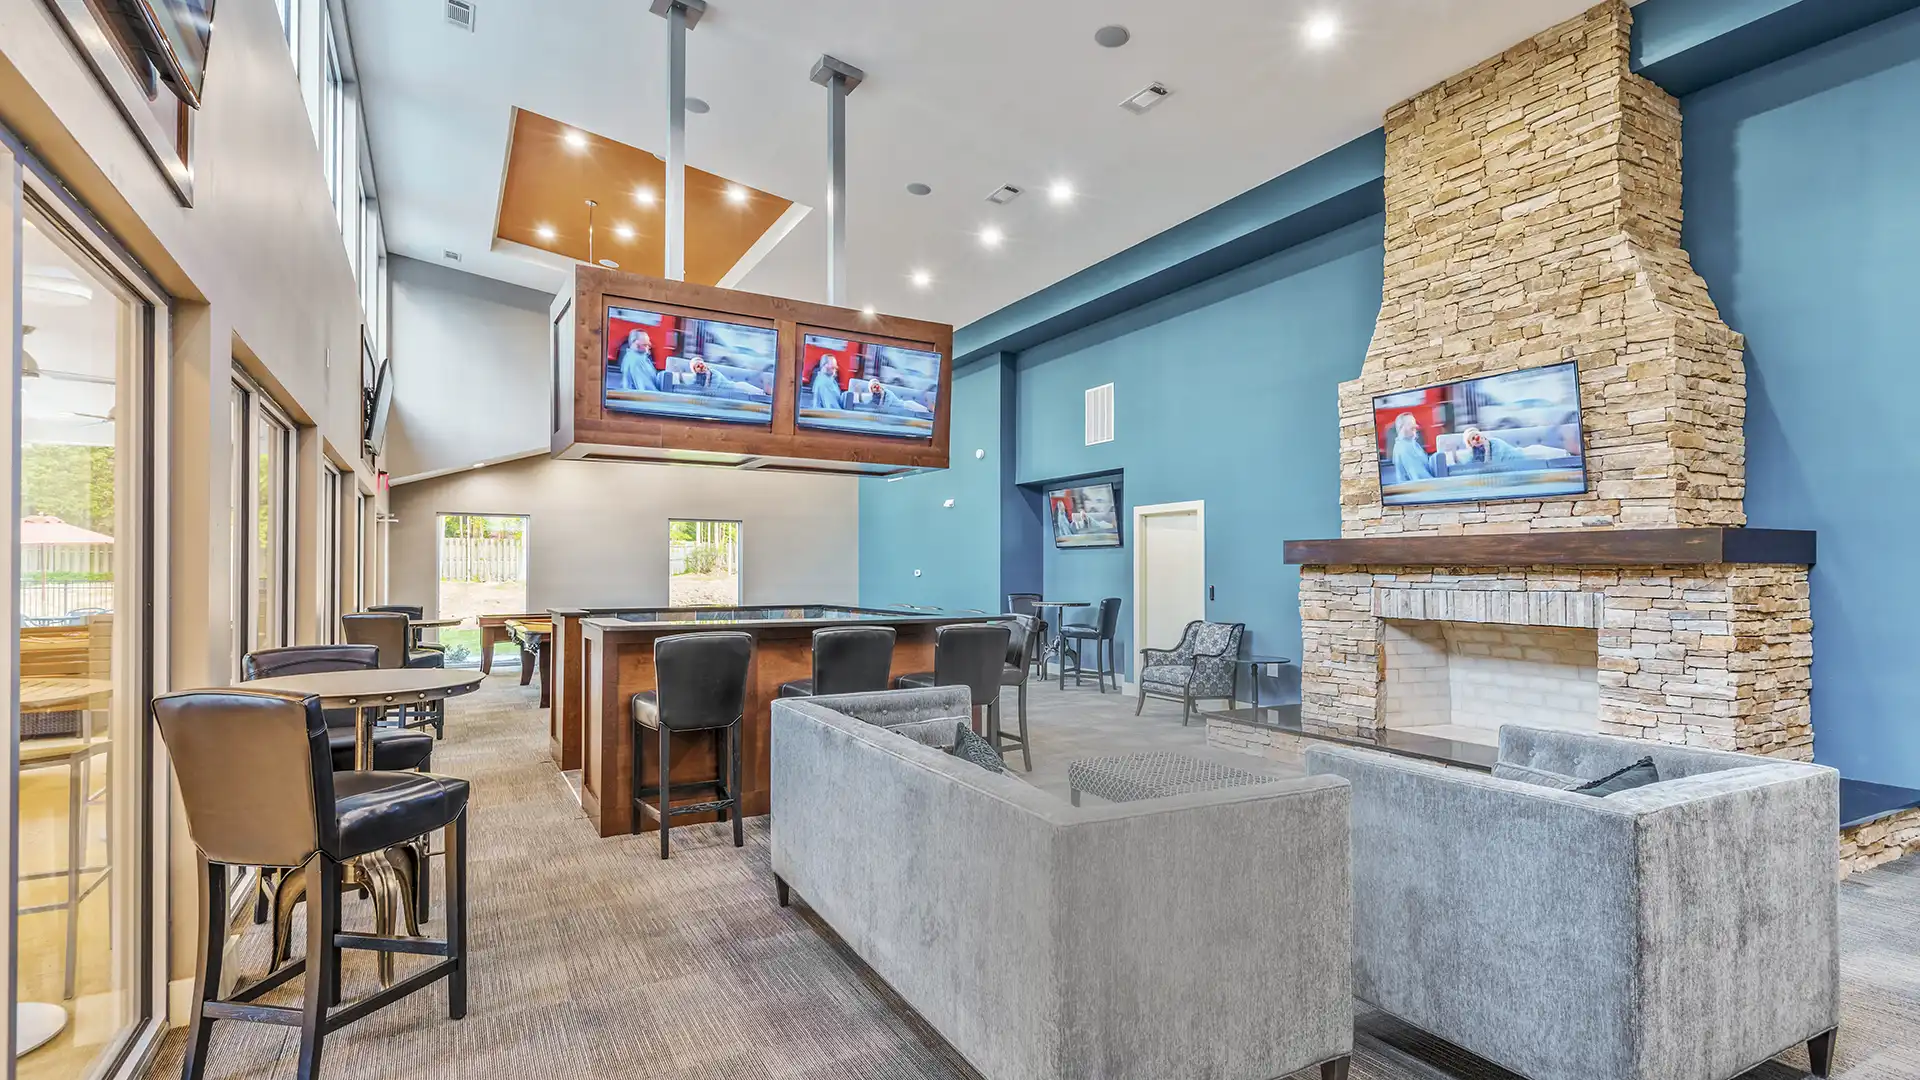 Clubhouse with large fireplace, couches, hightop seating, and several TVs.